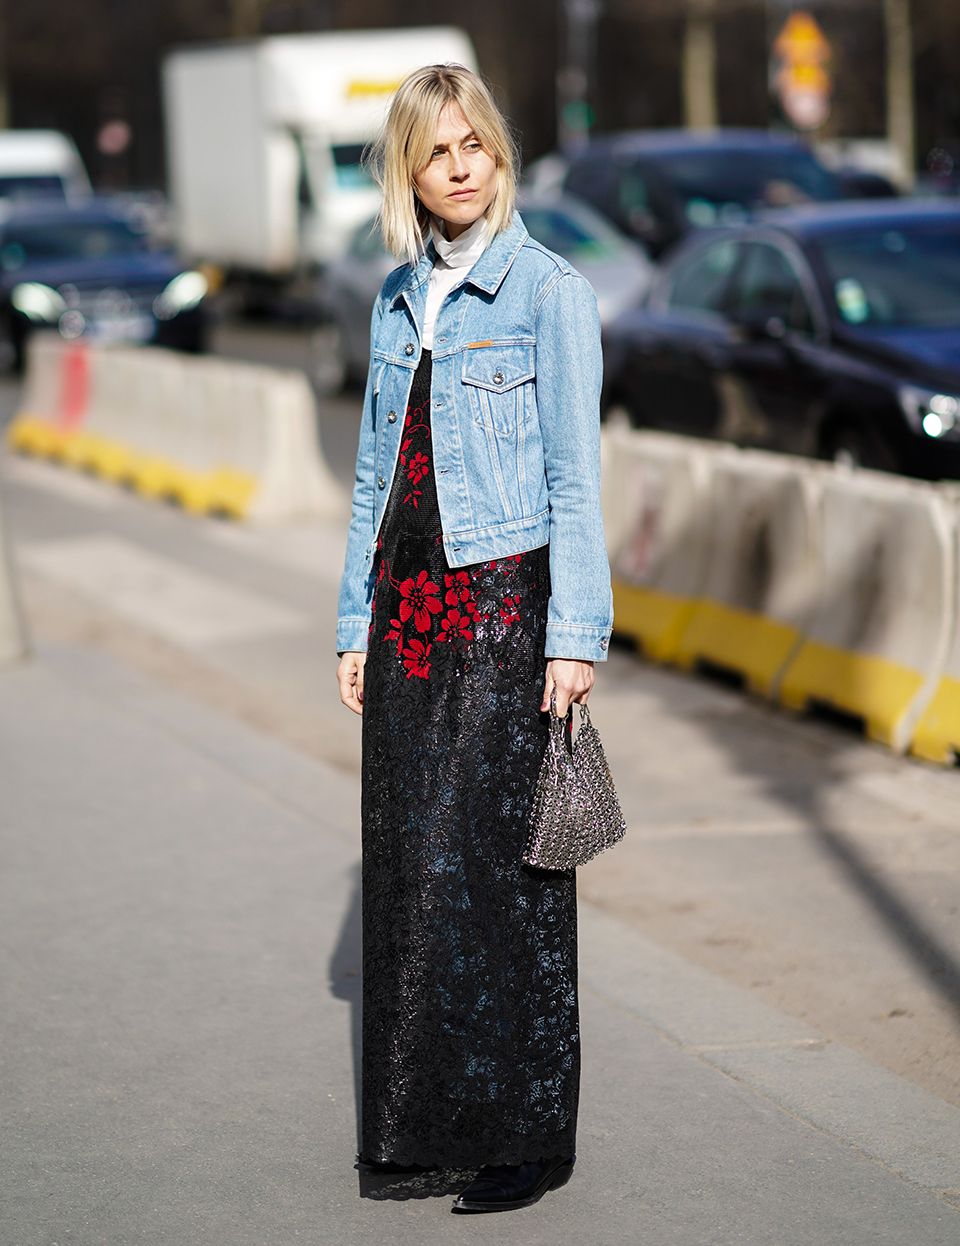 Style denim with lace